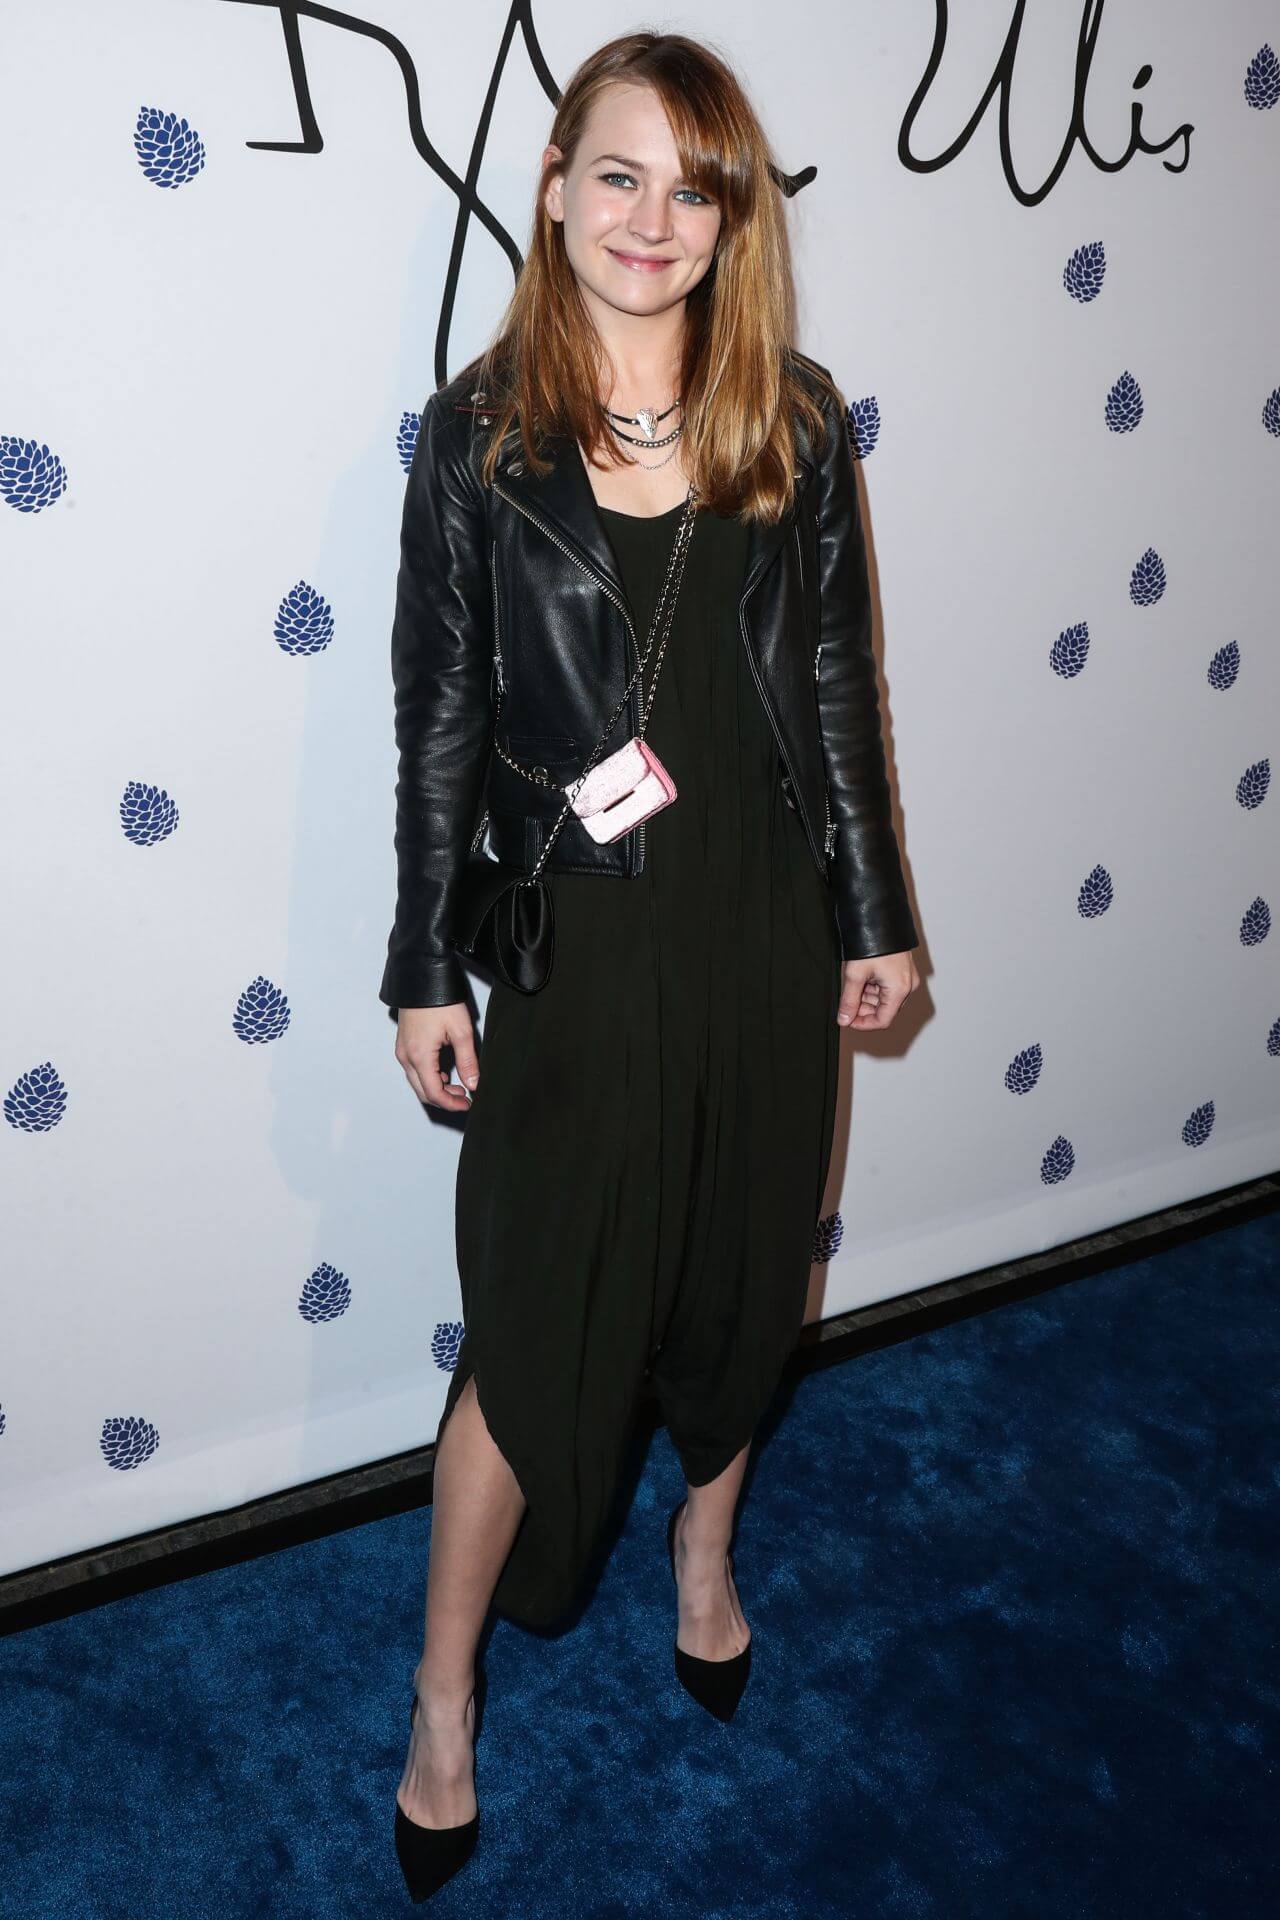 Britt Robertson  In a Long Black Dress With a Leather Jacket